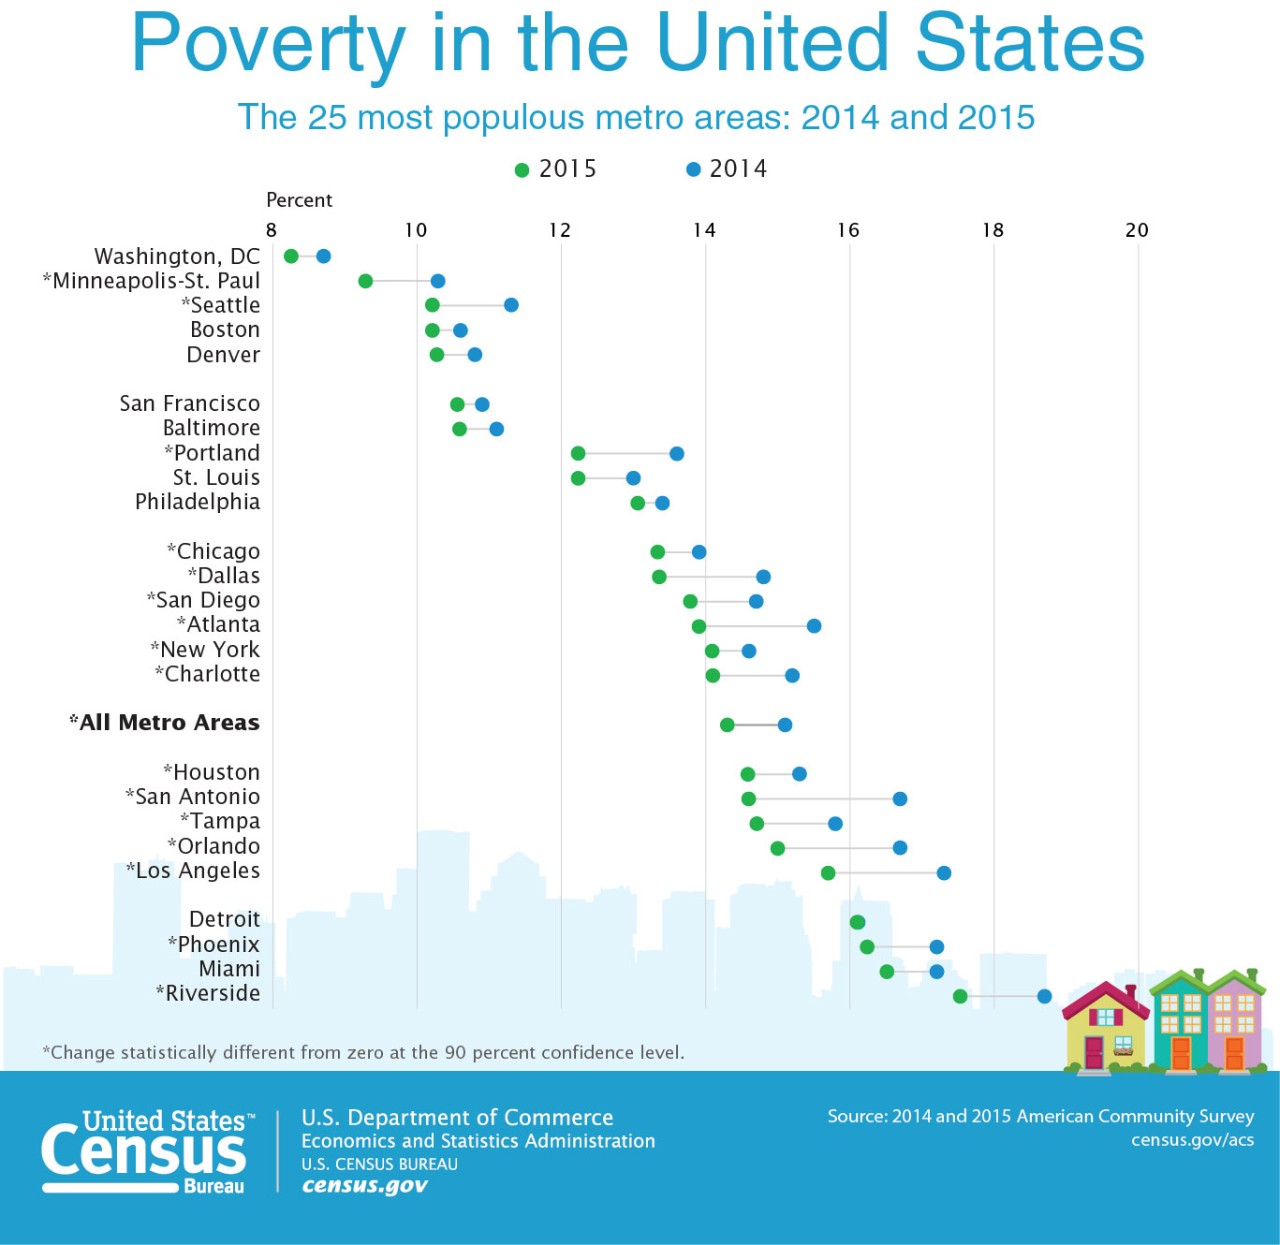 Poverty in the United States